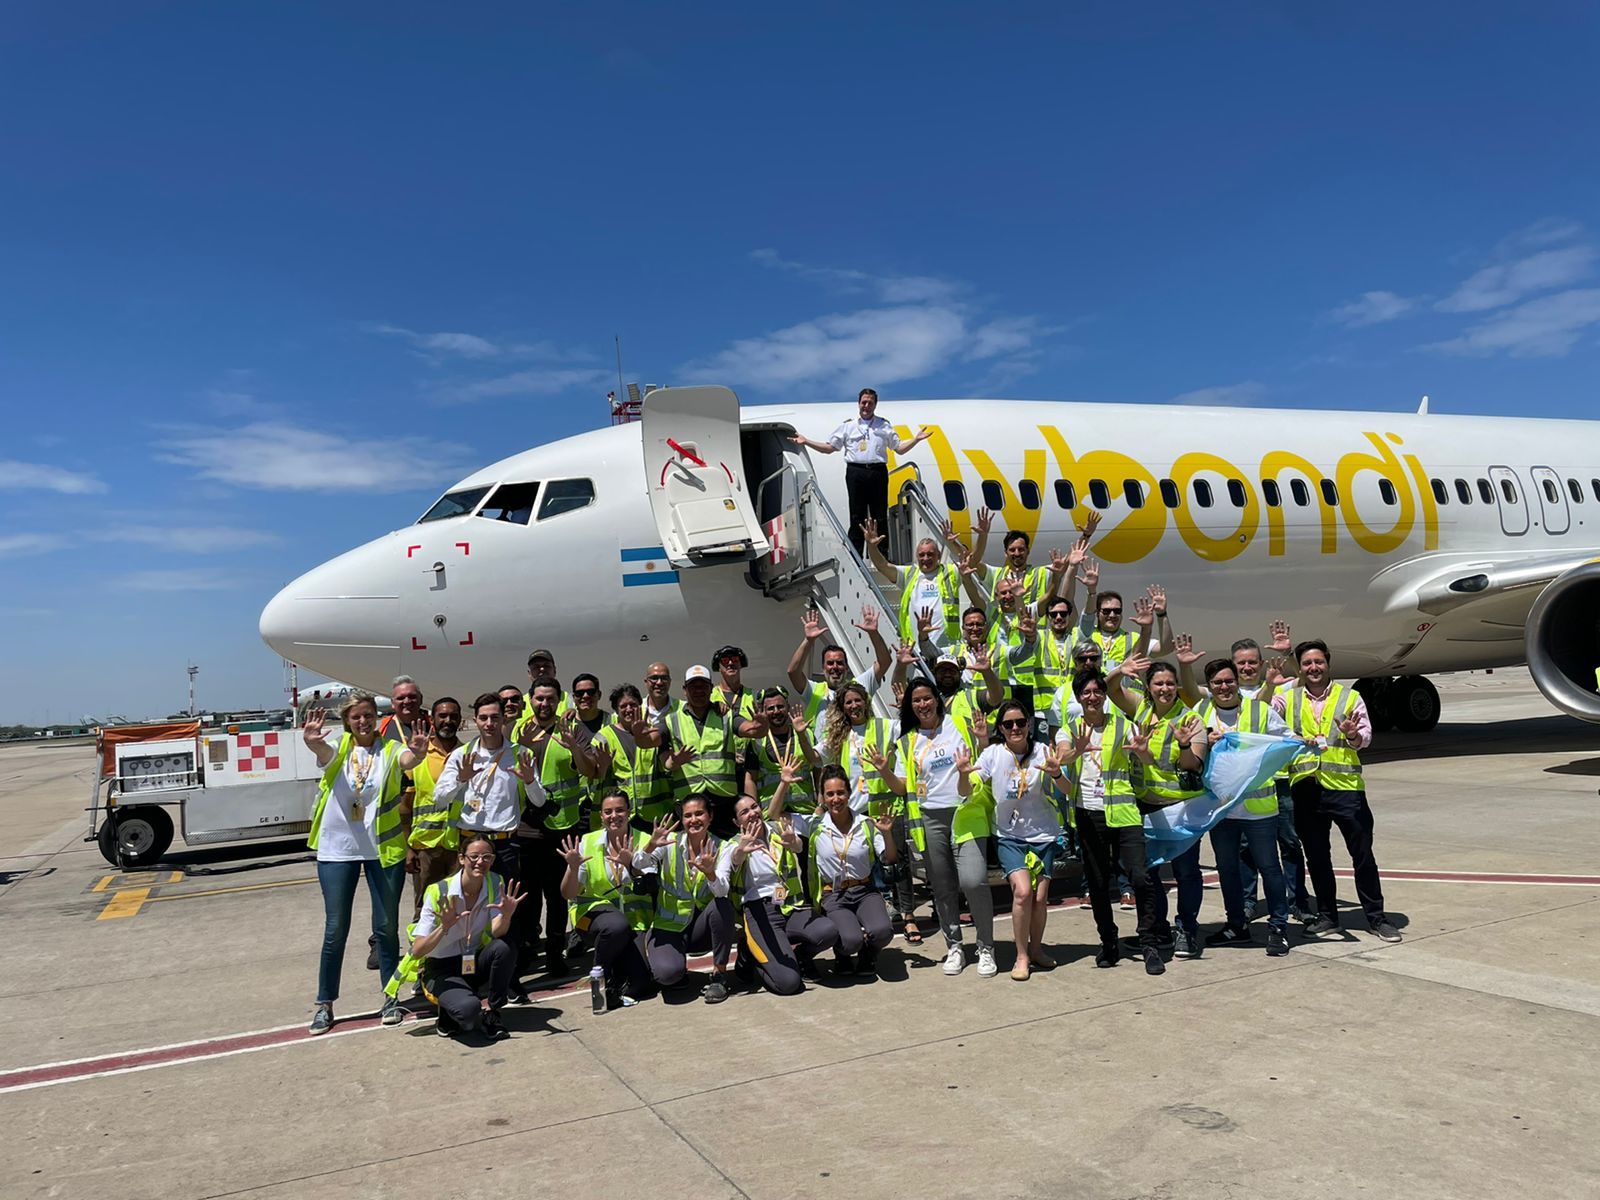 Flybondi's tenth aircraft